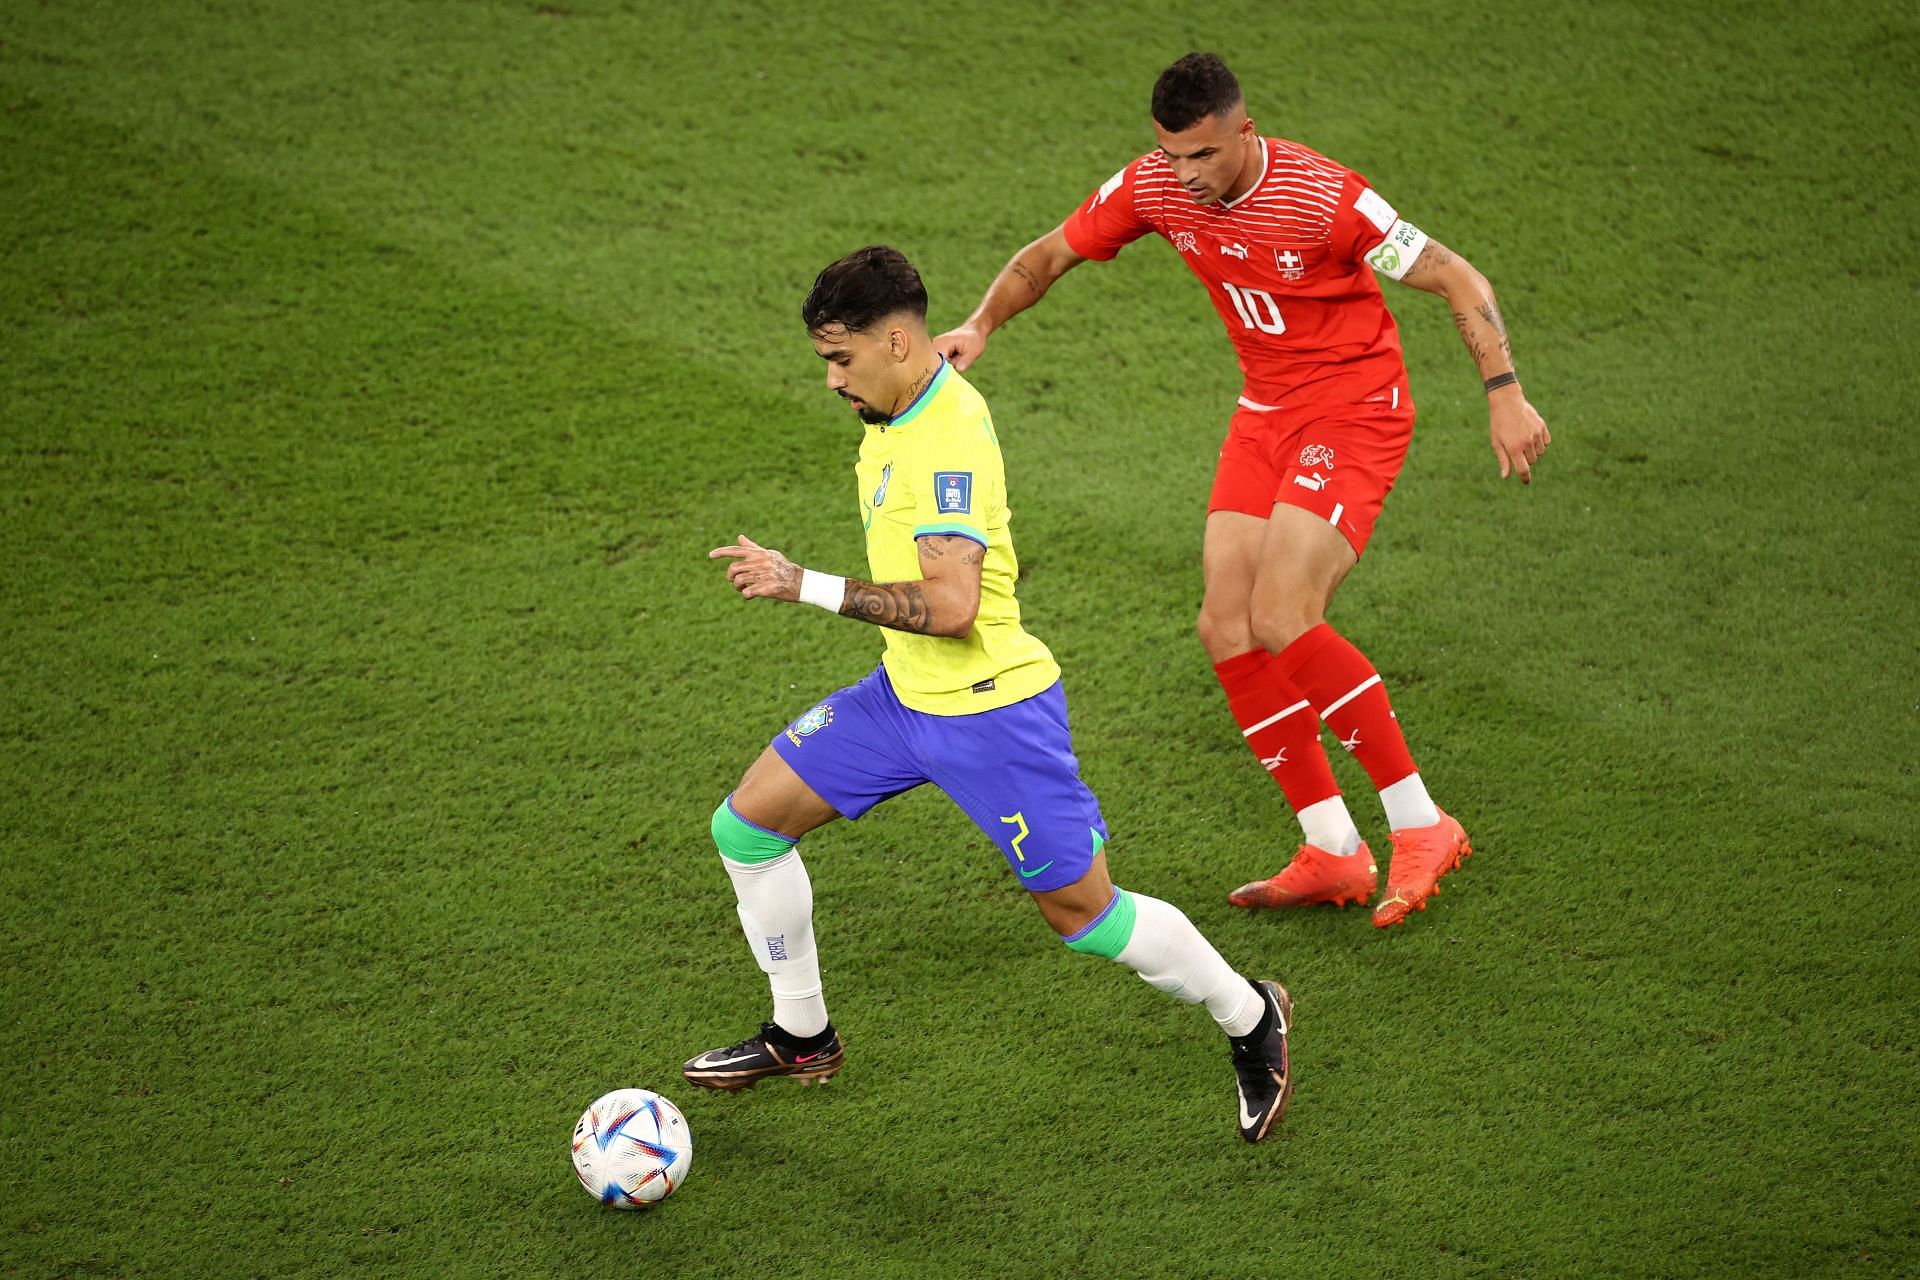 Lucas Paqueta controls the ball under pressure from Granit Xhaka.